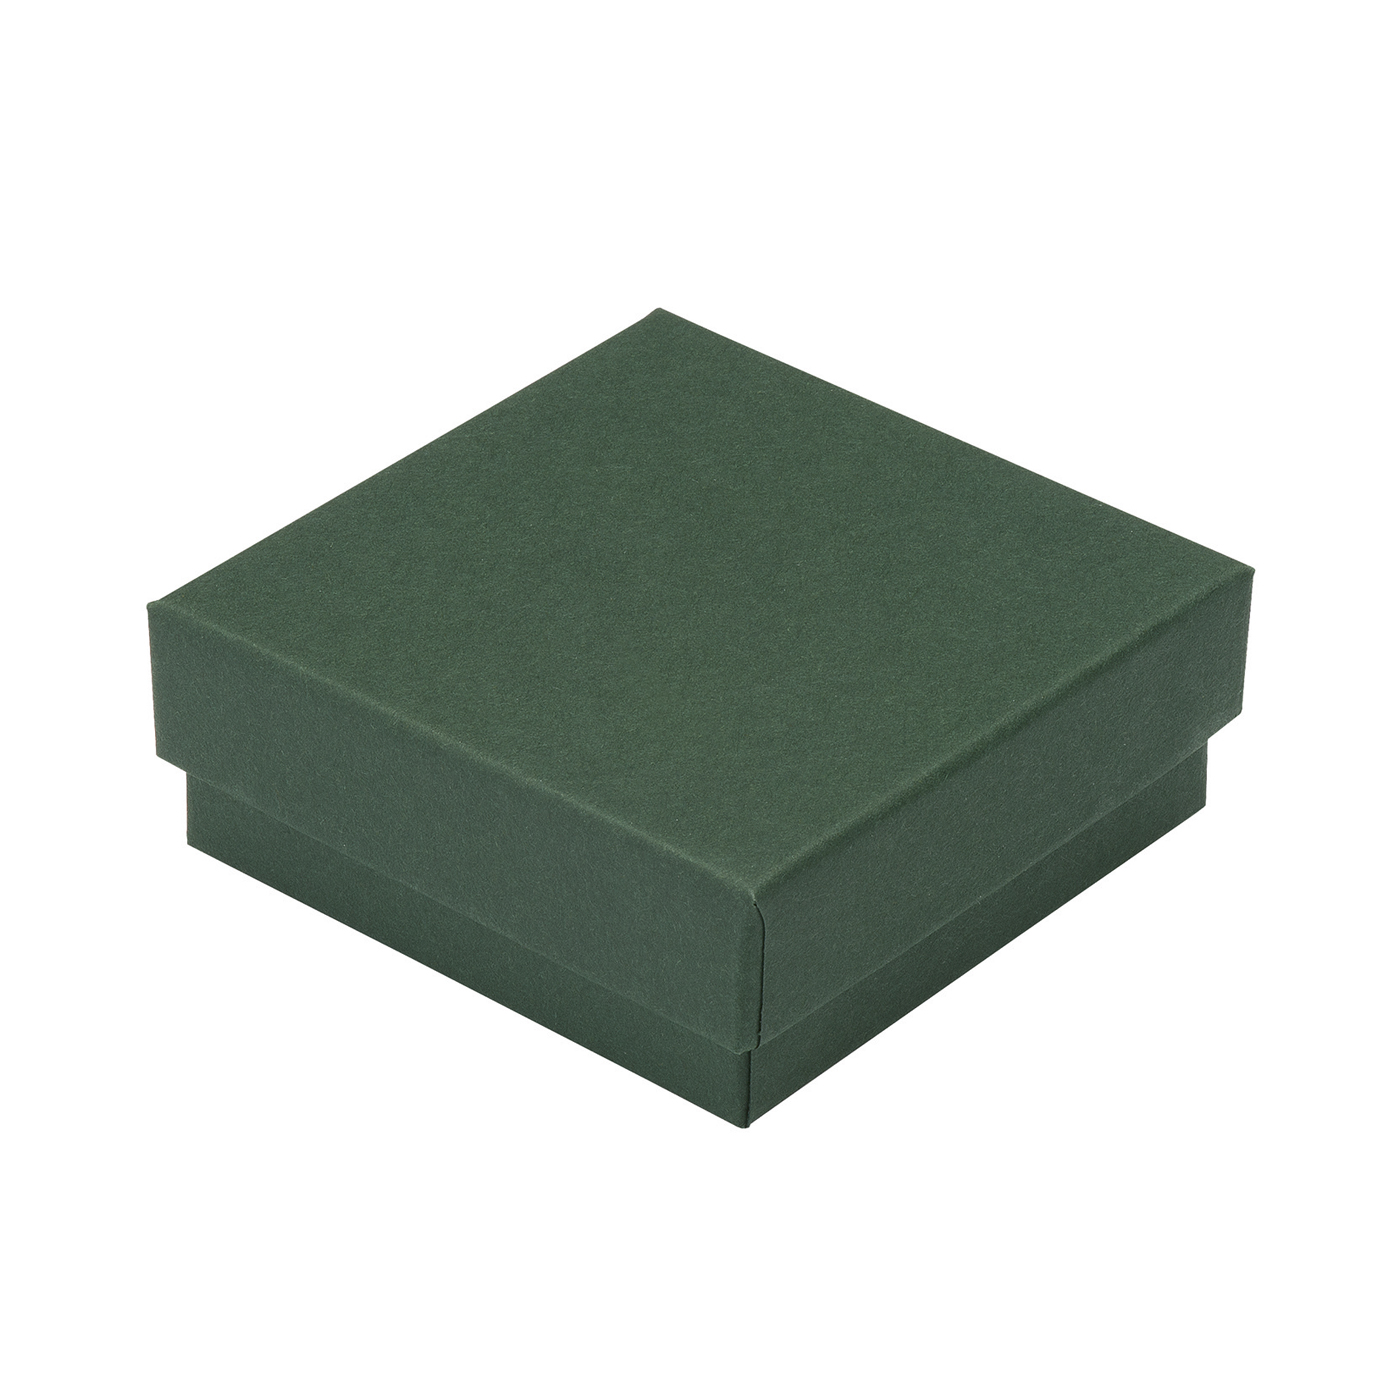 Jewellery Packaging "Eco", Green, 65 x 65 x 25 mm - 1 piece